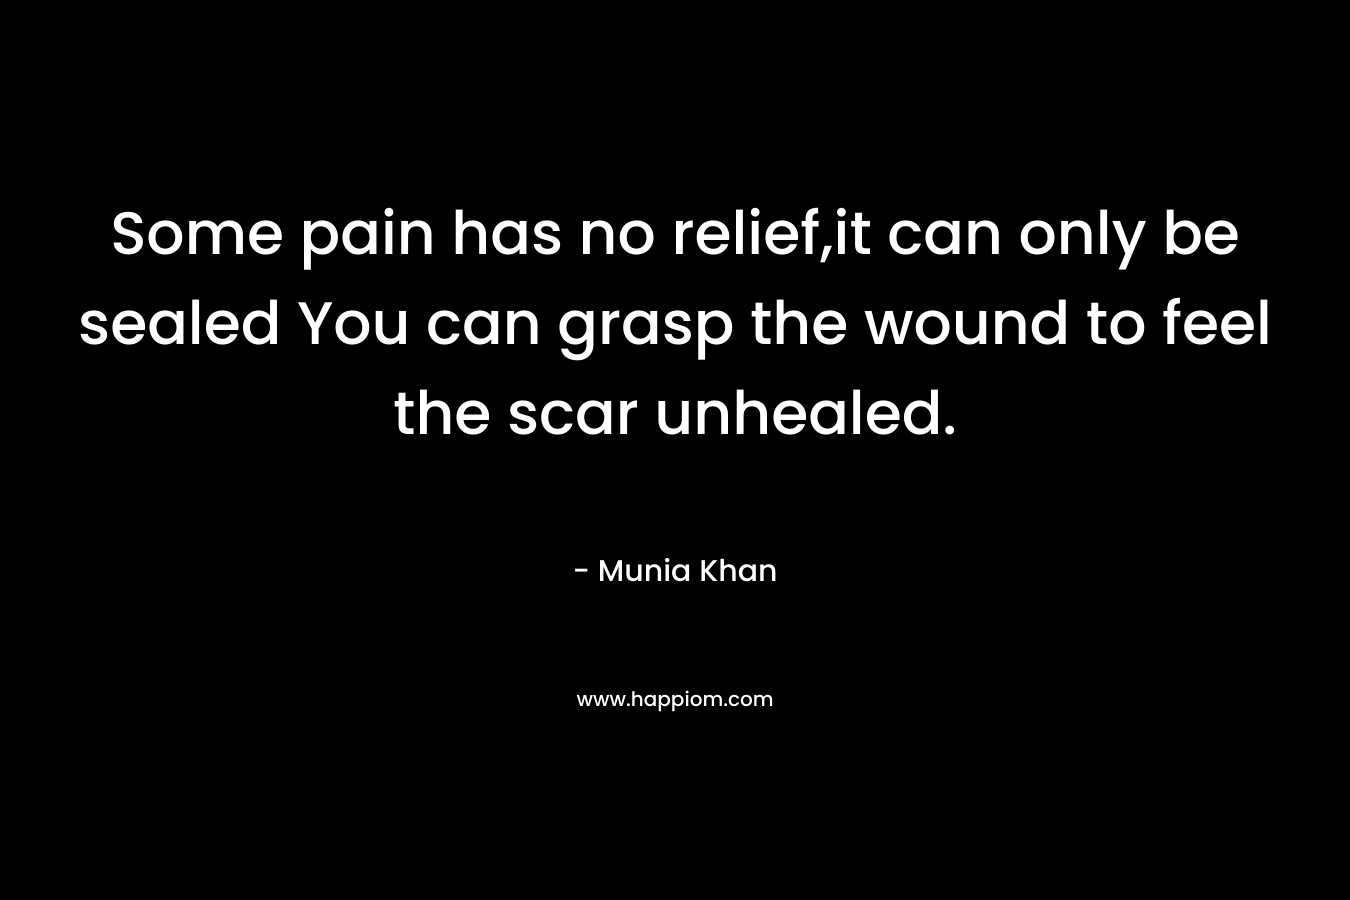 Some pain has no relief,it can only be sealed You can grasp the wound to feel the scar unhealed.